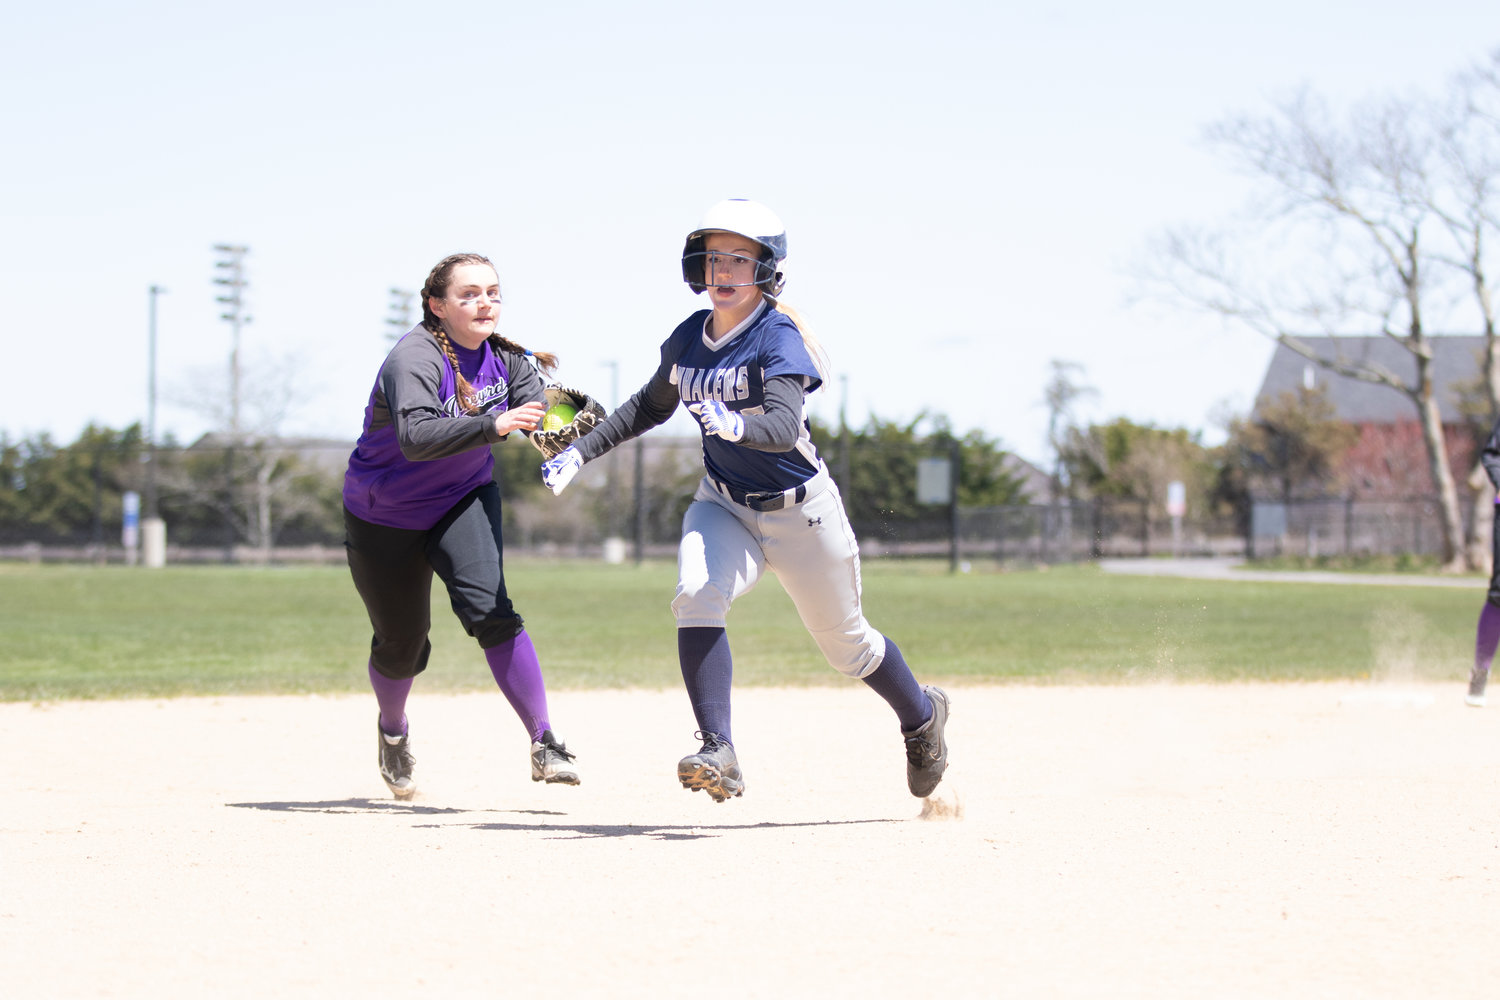 Lola Caron runs past the tag of an outstretched Vineyard infielder.